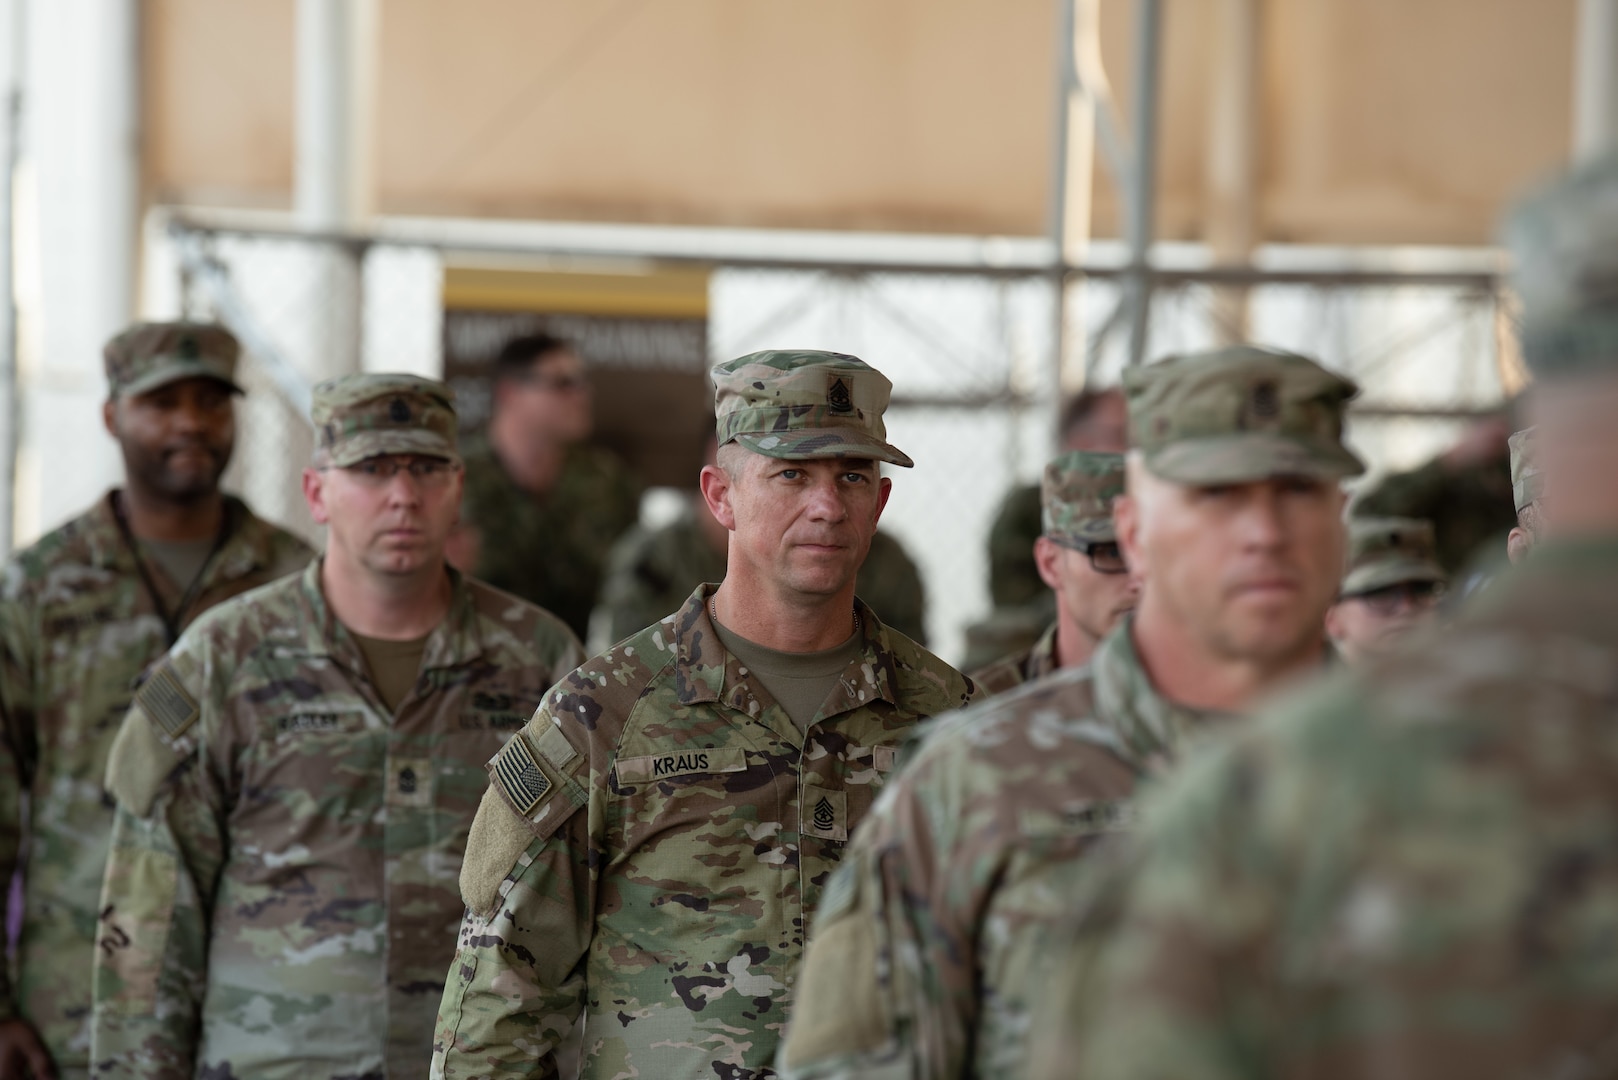 Members of the 404th Maneuver Enhancement Brigade wait to receive their combat patch, a military milestone earned while serving in hostile conditions, March 17, 2022.